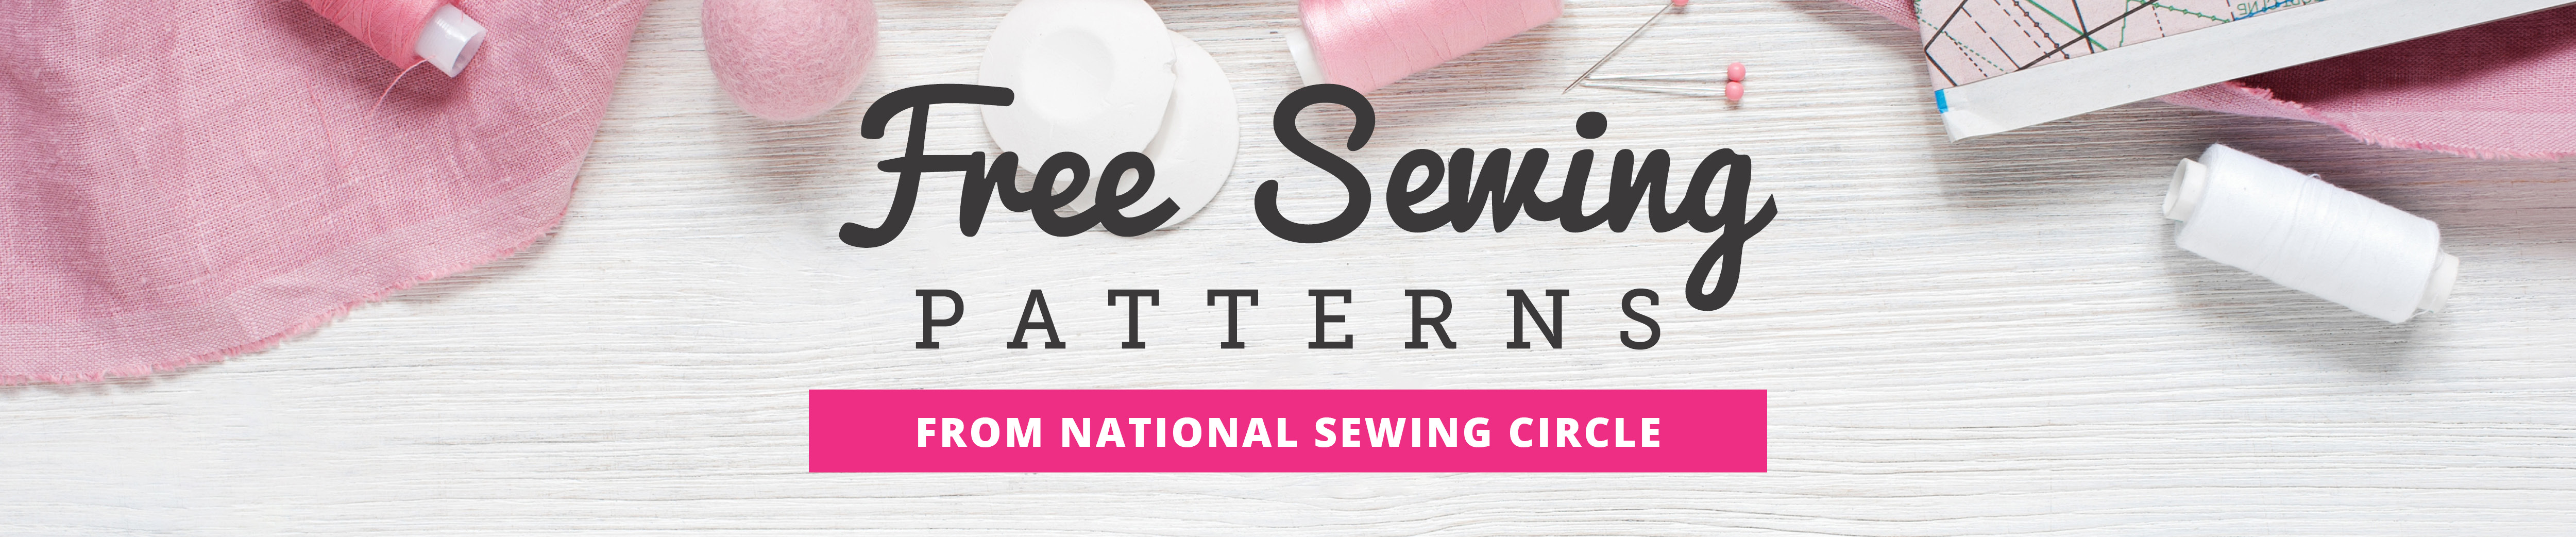 Free Sewing Patterns from National Sewing Circle